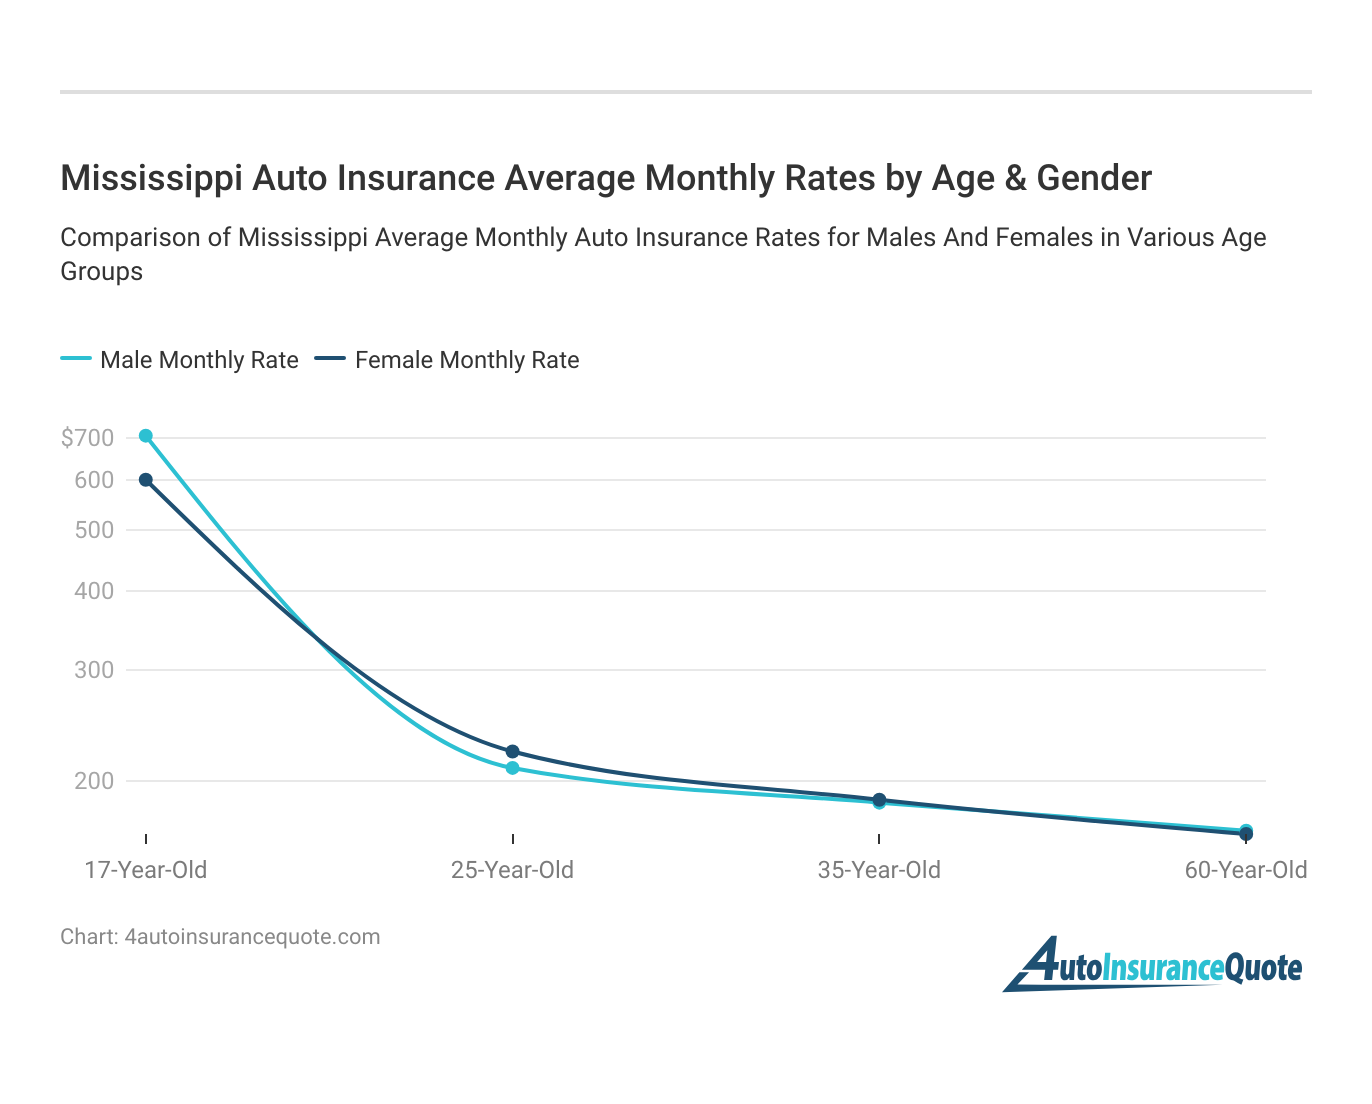 <h3>Mississippi Auto Insurance Average Monthly Rates by Age & Gender</h3>